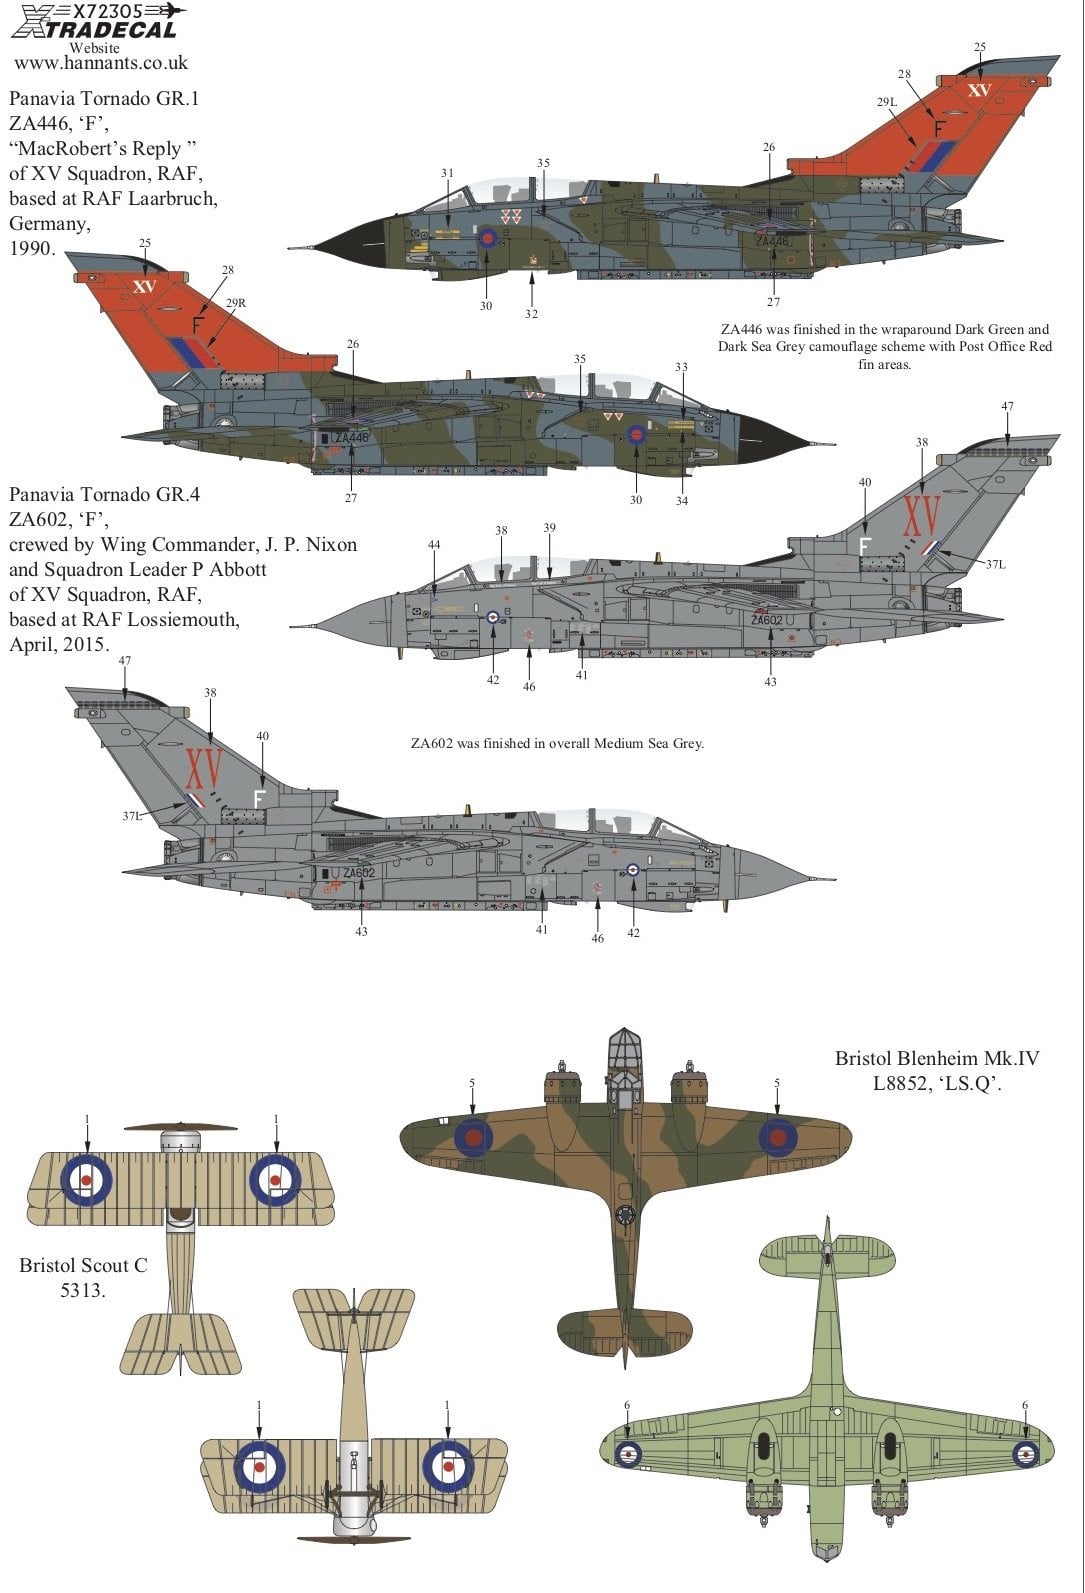 Xtradecal X72305 1/72 RAF XV Squadron History Model Decals - SGS Model Store